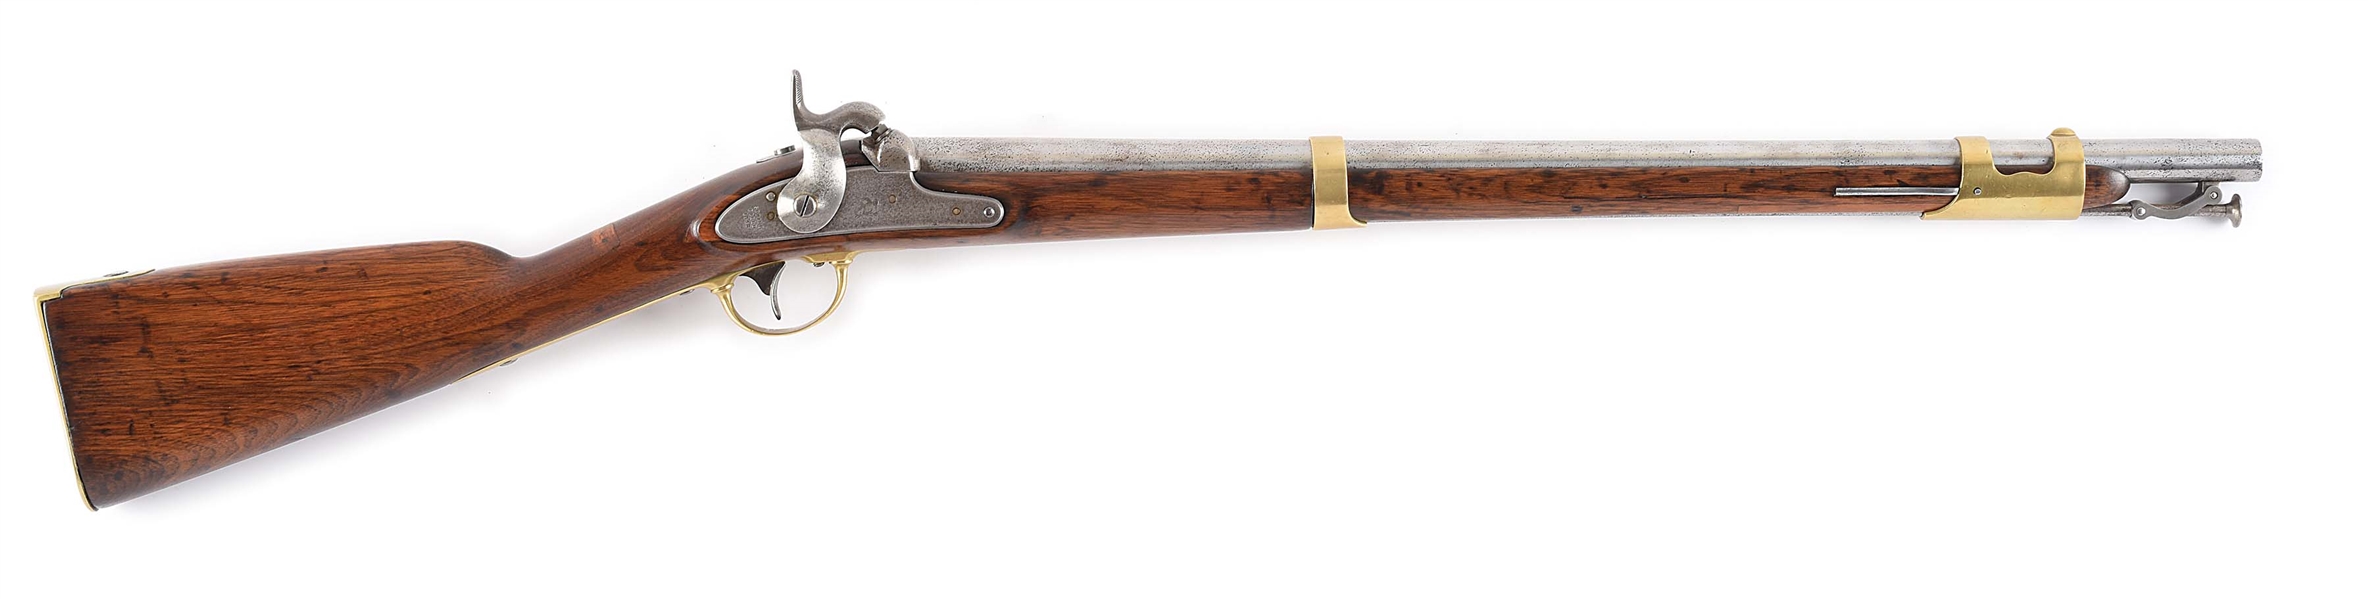 (A) US SPRINGFIELD MODEL 1847 CAVALRY MUSKETOON DATED 1848.